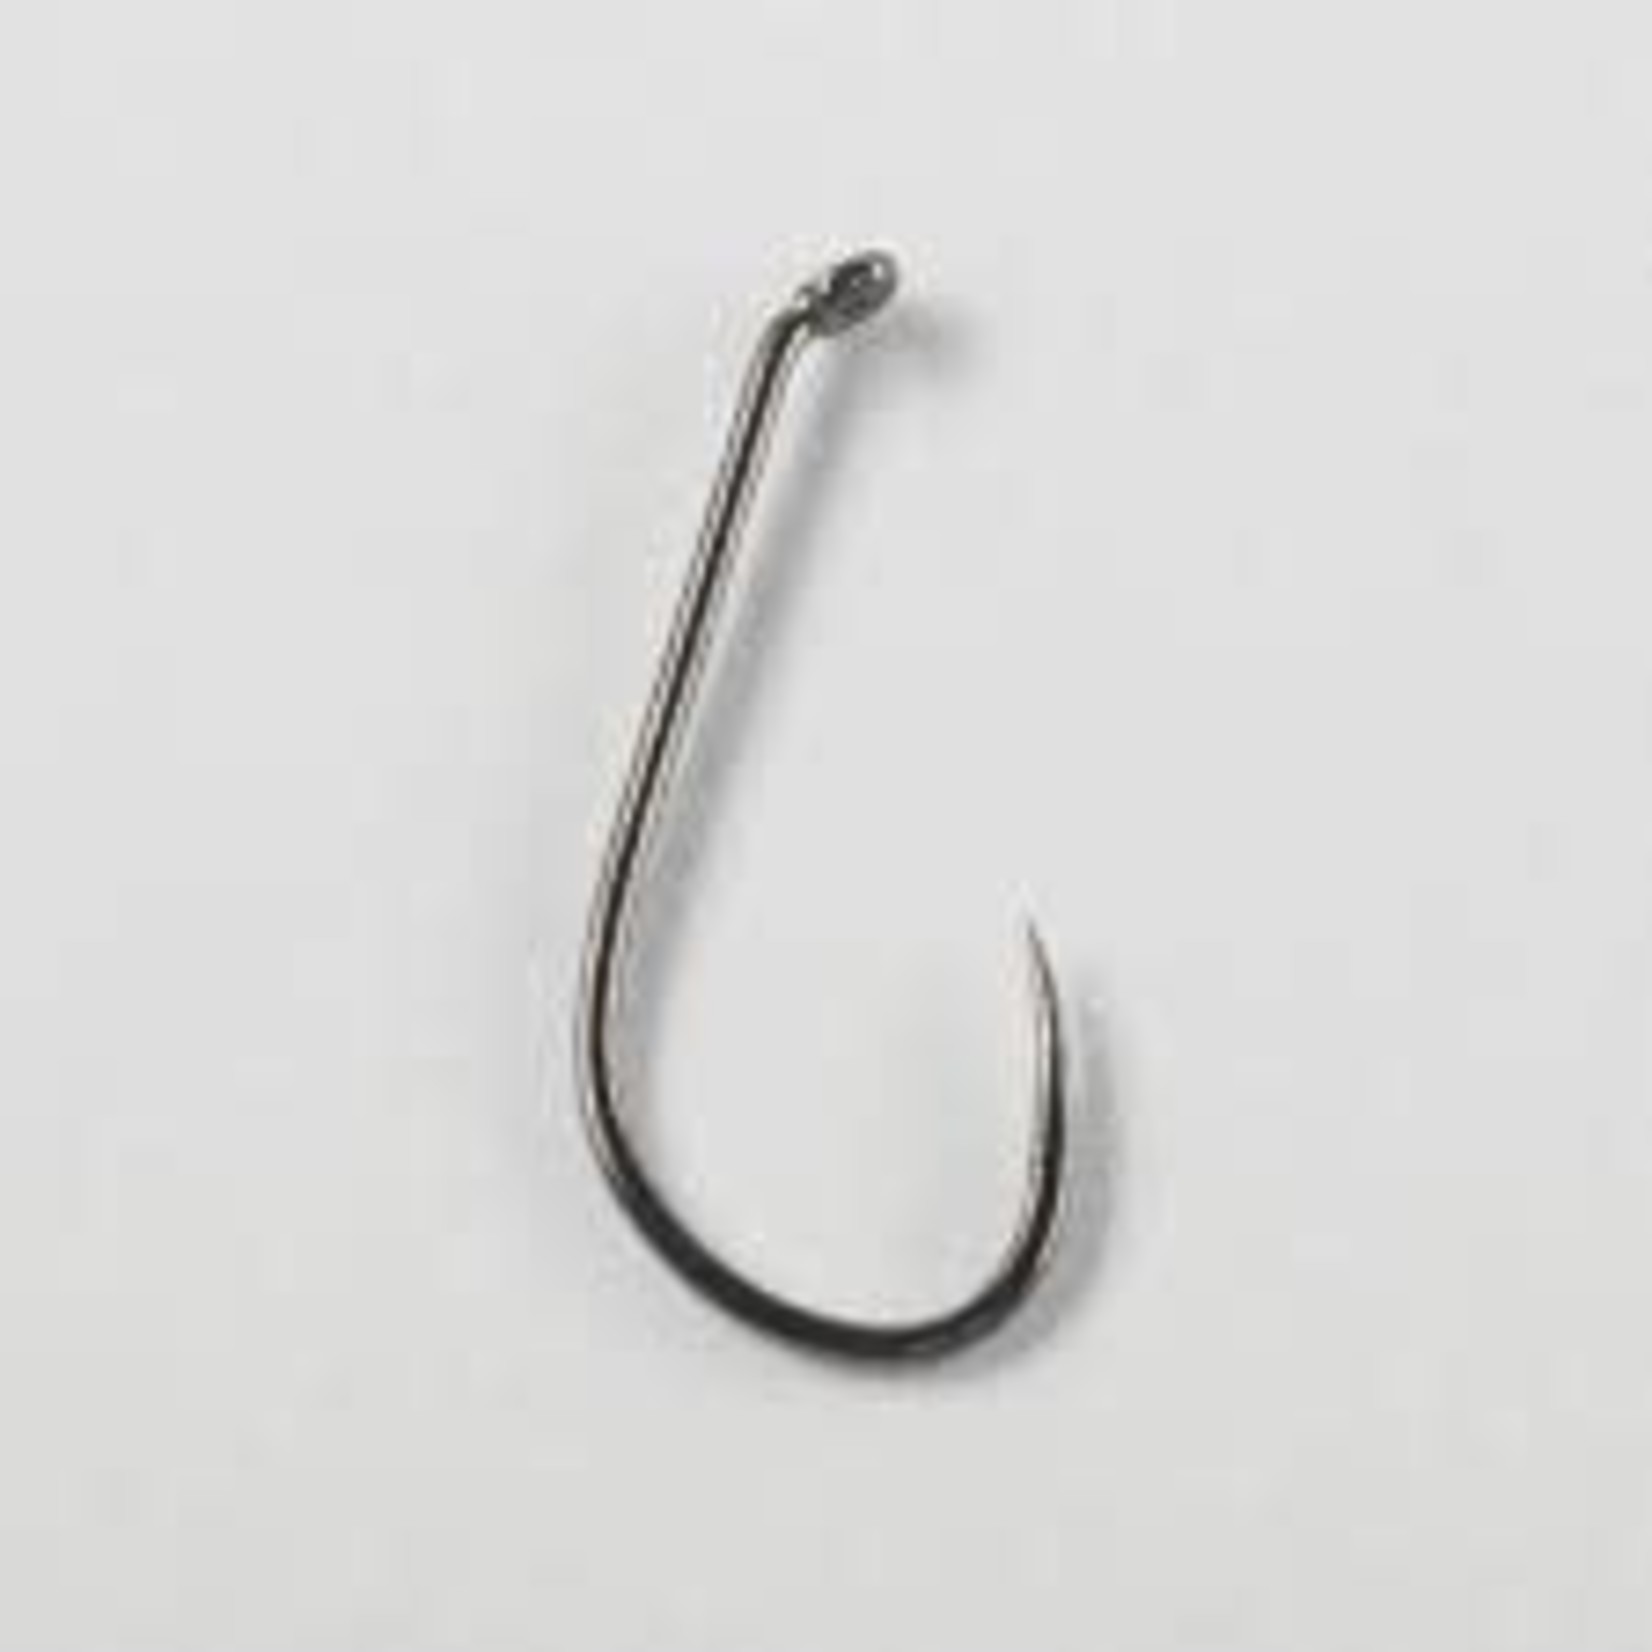 ORVIS Tactical Dry Fly Hook